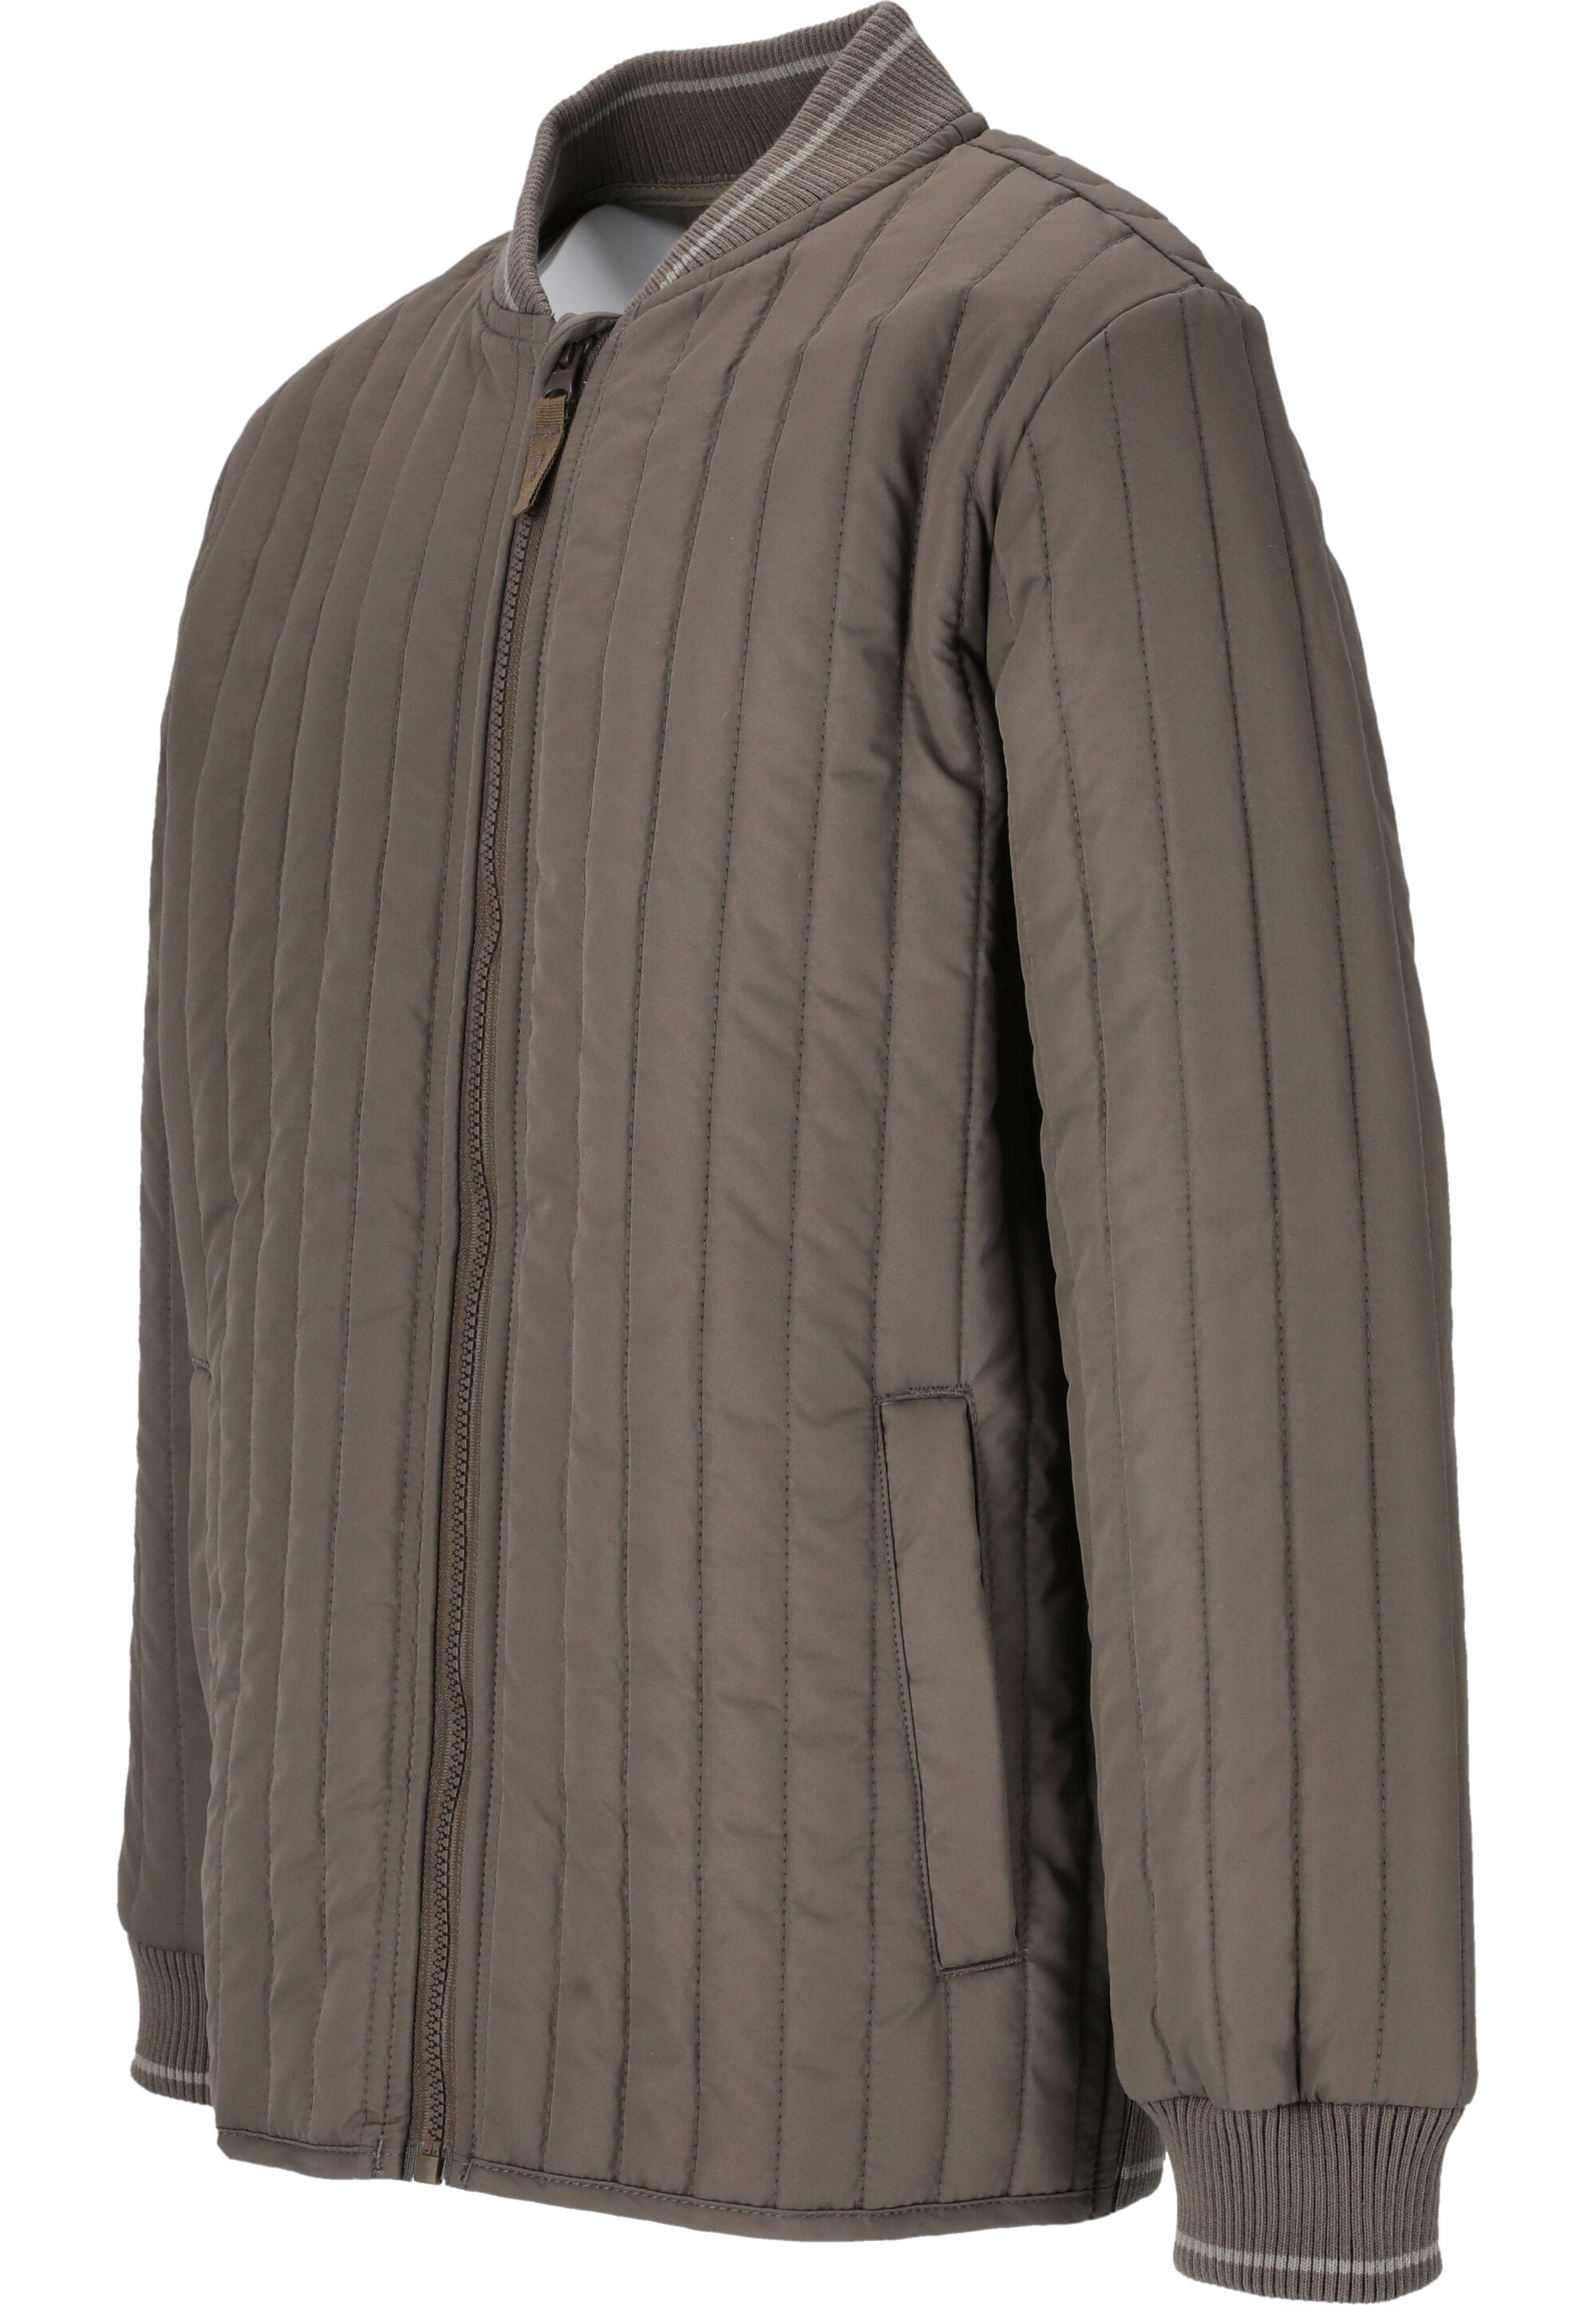 WEATHER REPORT Outdoorjacke »Palle«, in tollem Design